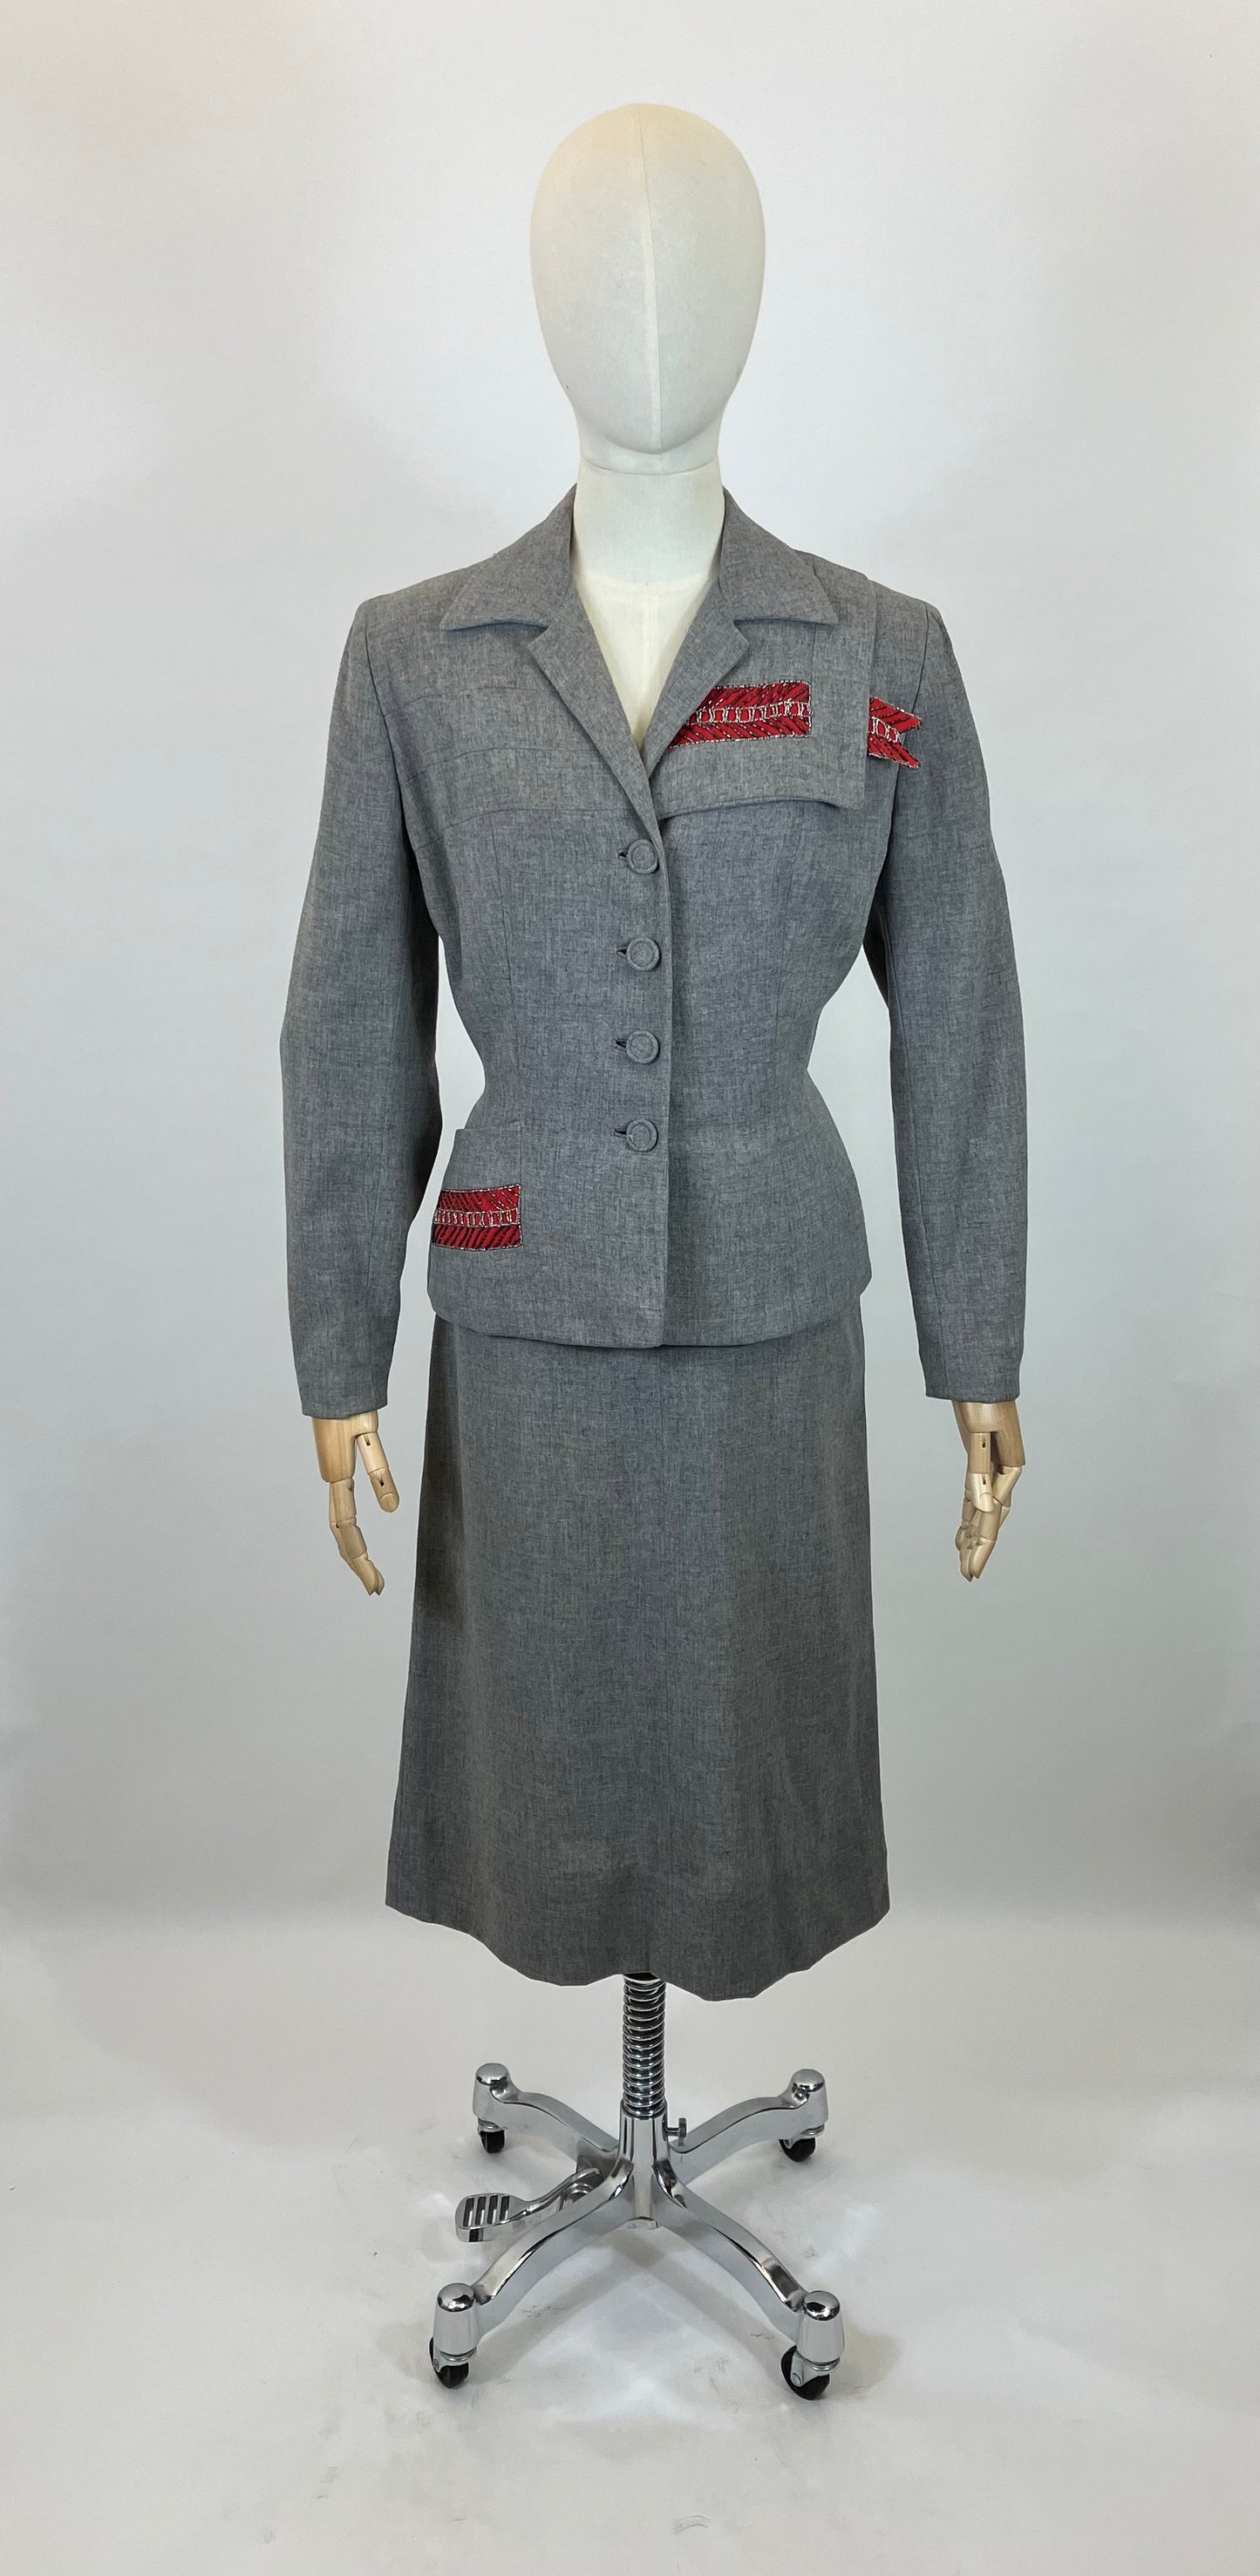 Original 1940’s Fabulous 2pc suit - in Grey with Red accent detailing